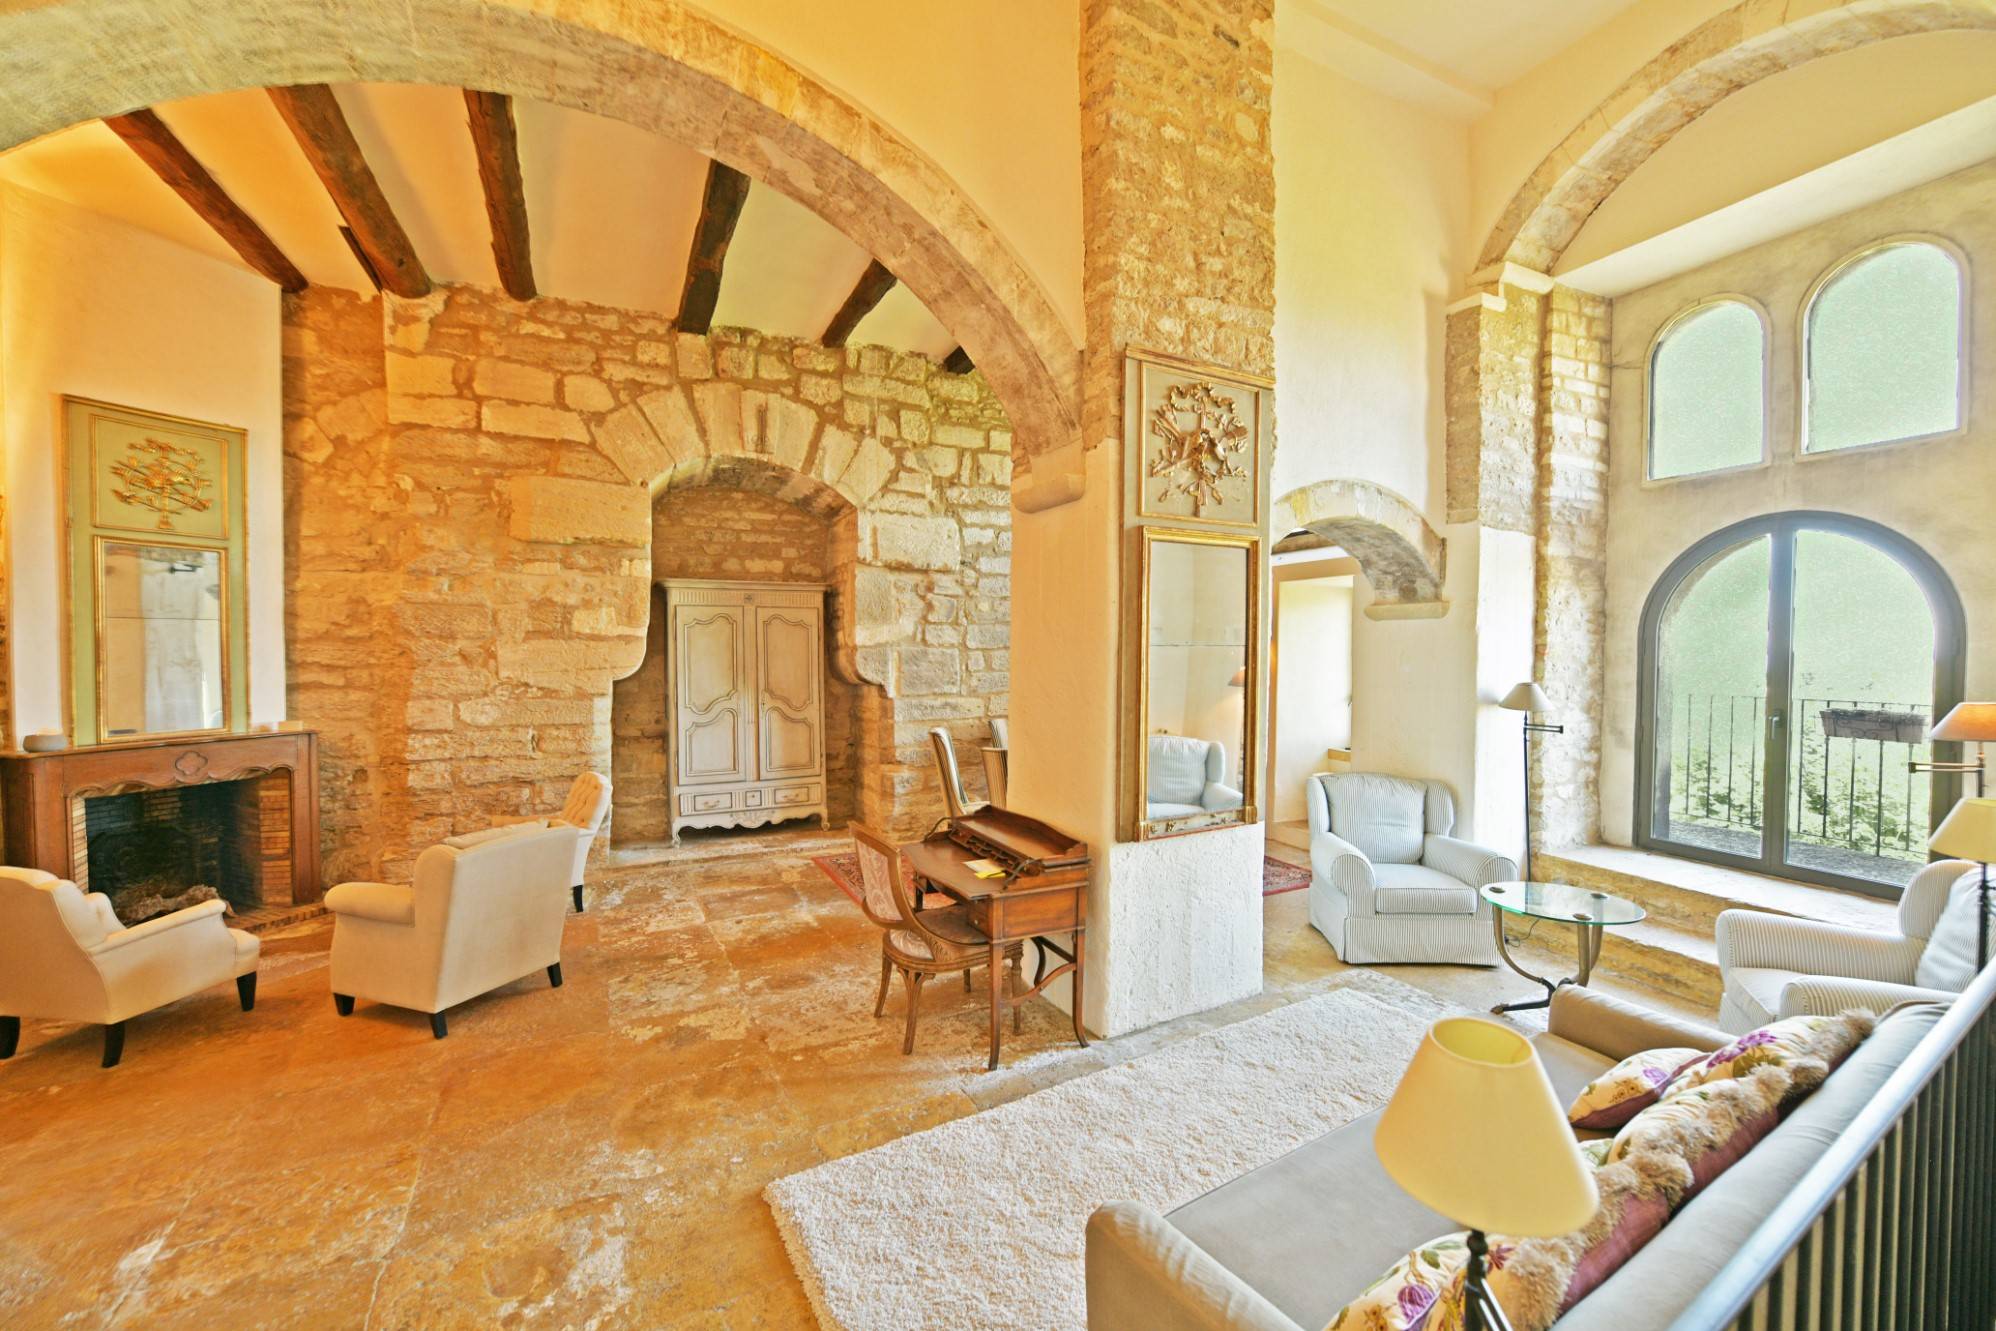 In Gordes, for sale, superb village house of XVIIth century, entiely renovated, full of charm and authenticity. 